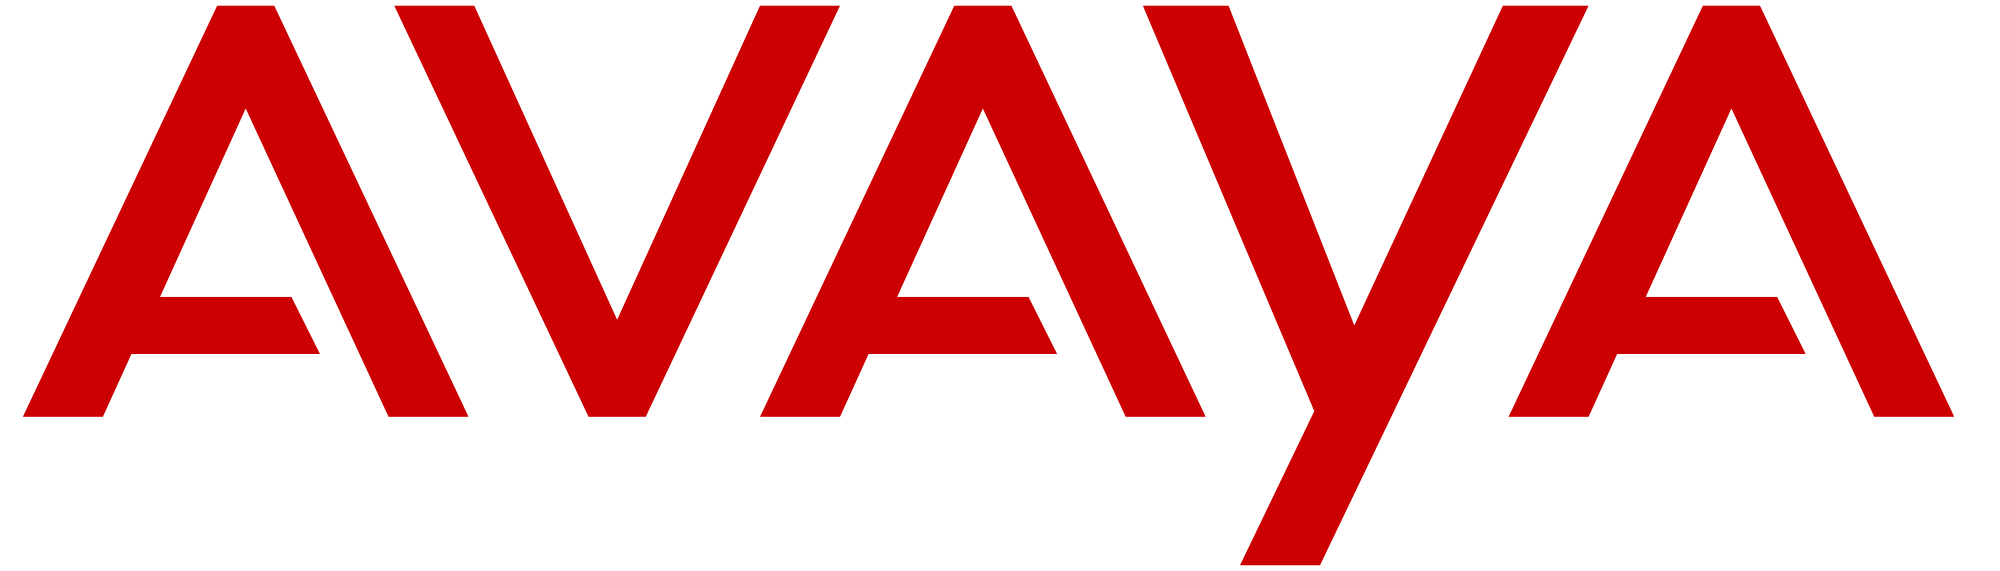 March Madness Highlights More Network Affiliates - Computers Nationwide - Avaya